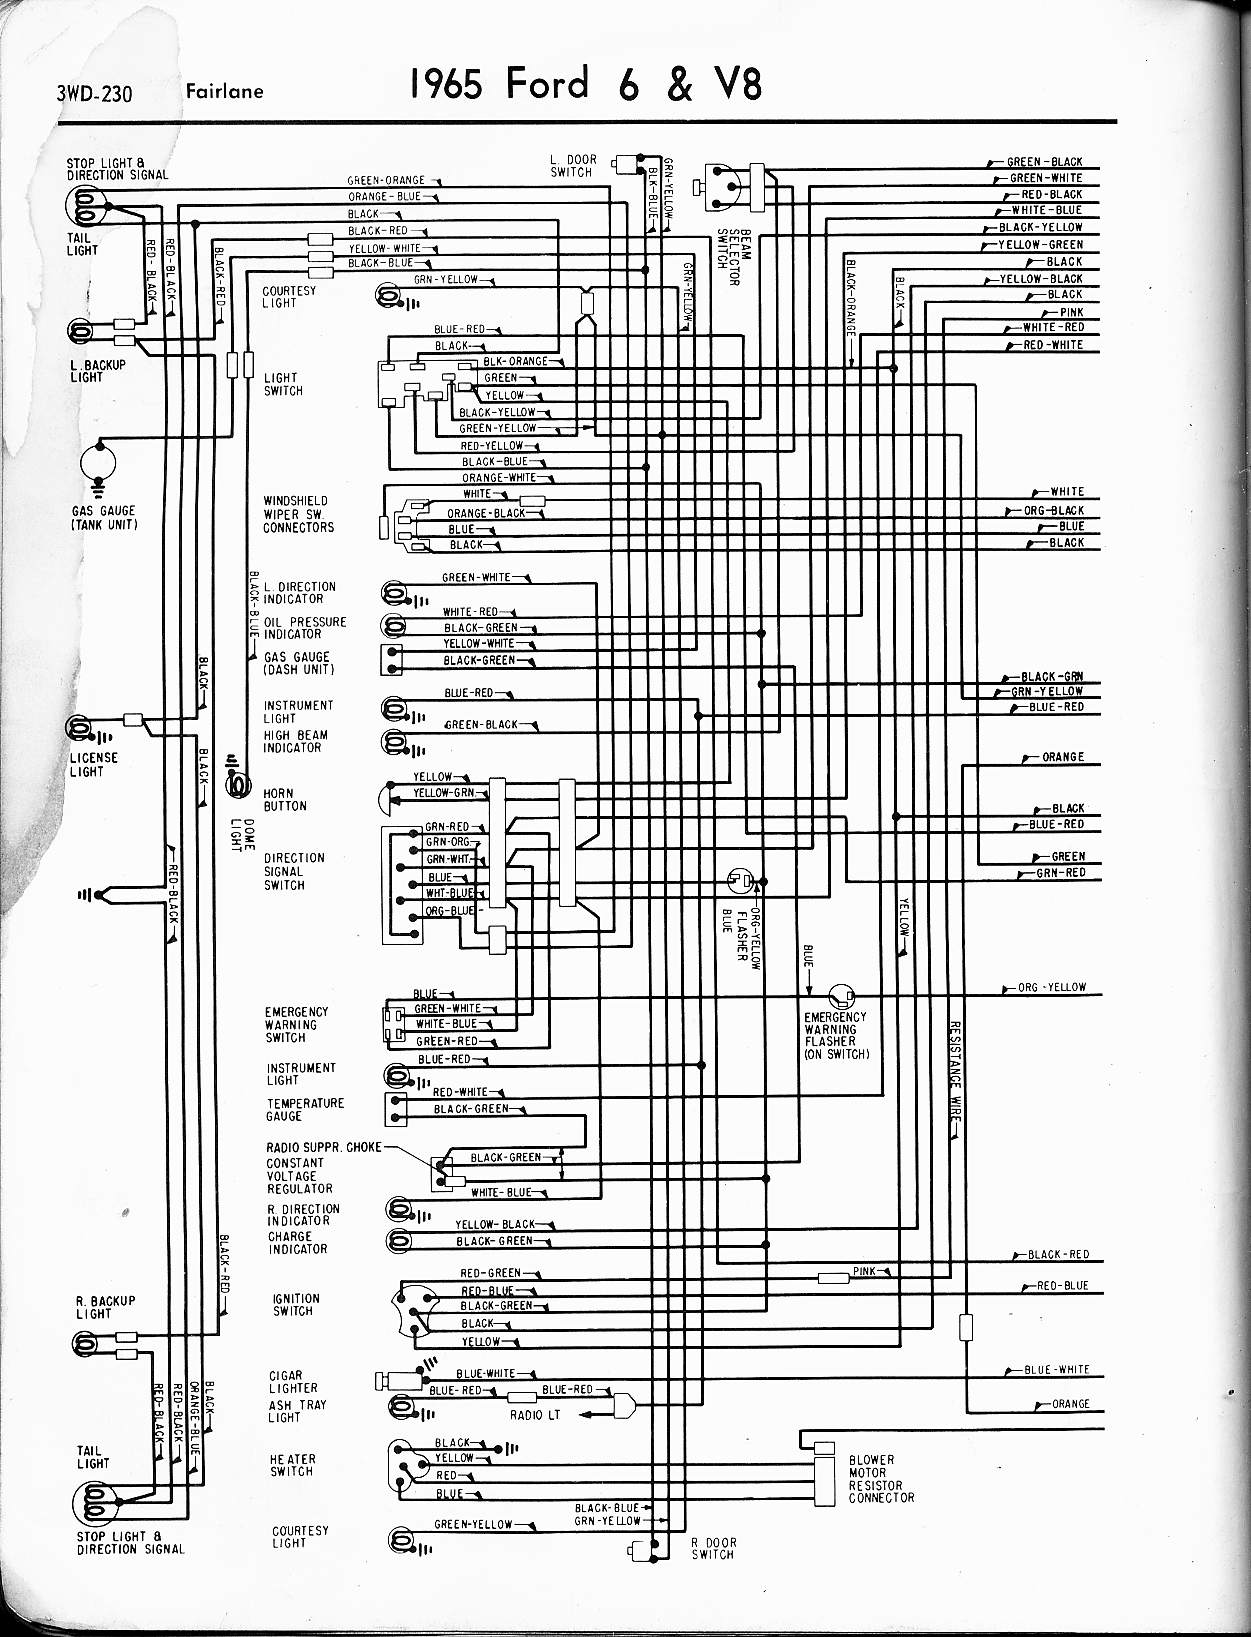 1965 Ford F100 Alternator Wiring Diagram from www.oldcarmanualproject.com